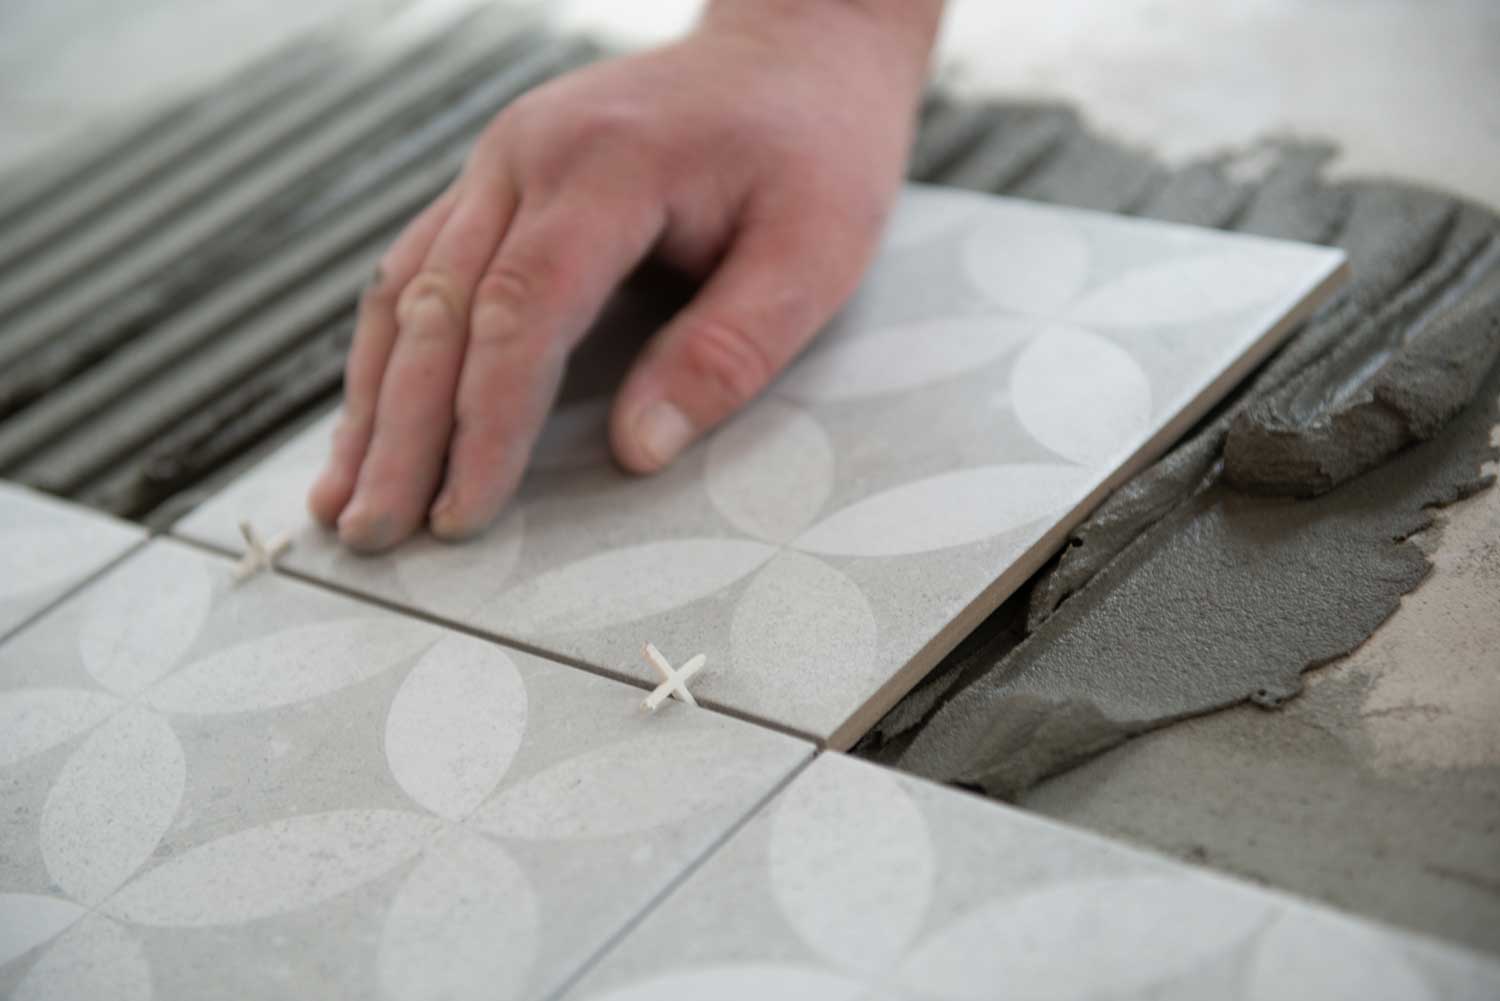 Seal your tile grout lines to keep beautiful tile floors - tips from Footprints Floors in Austin.